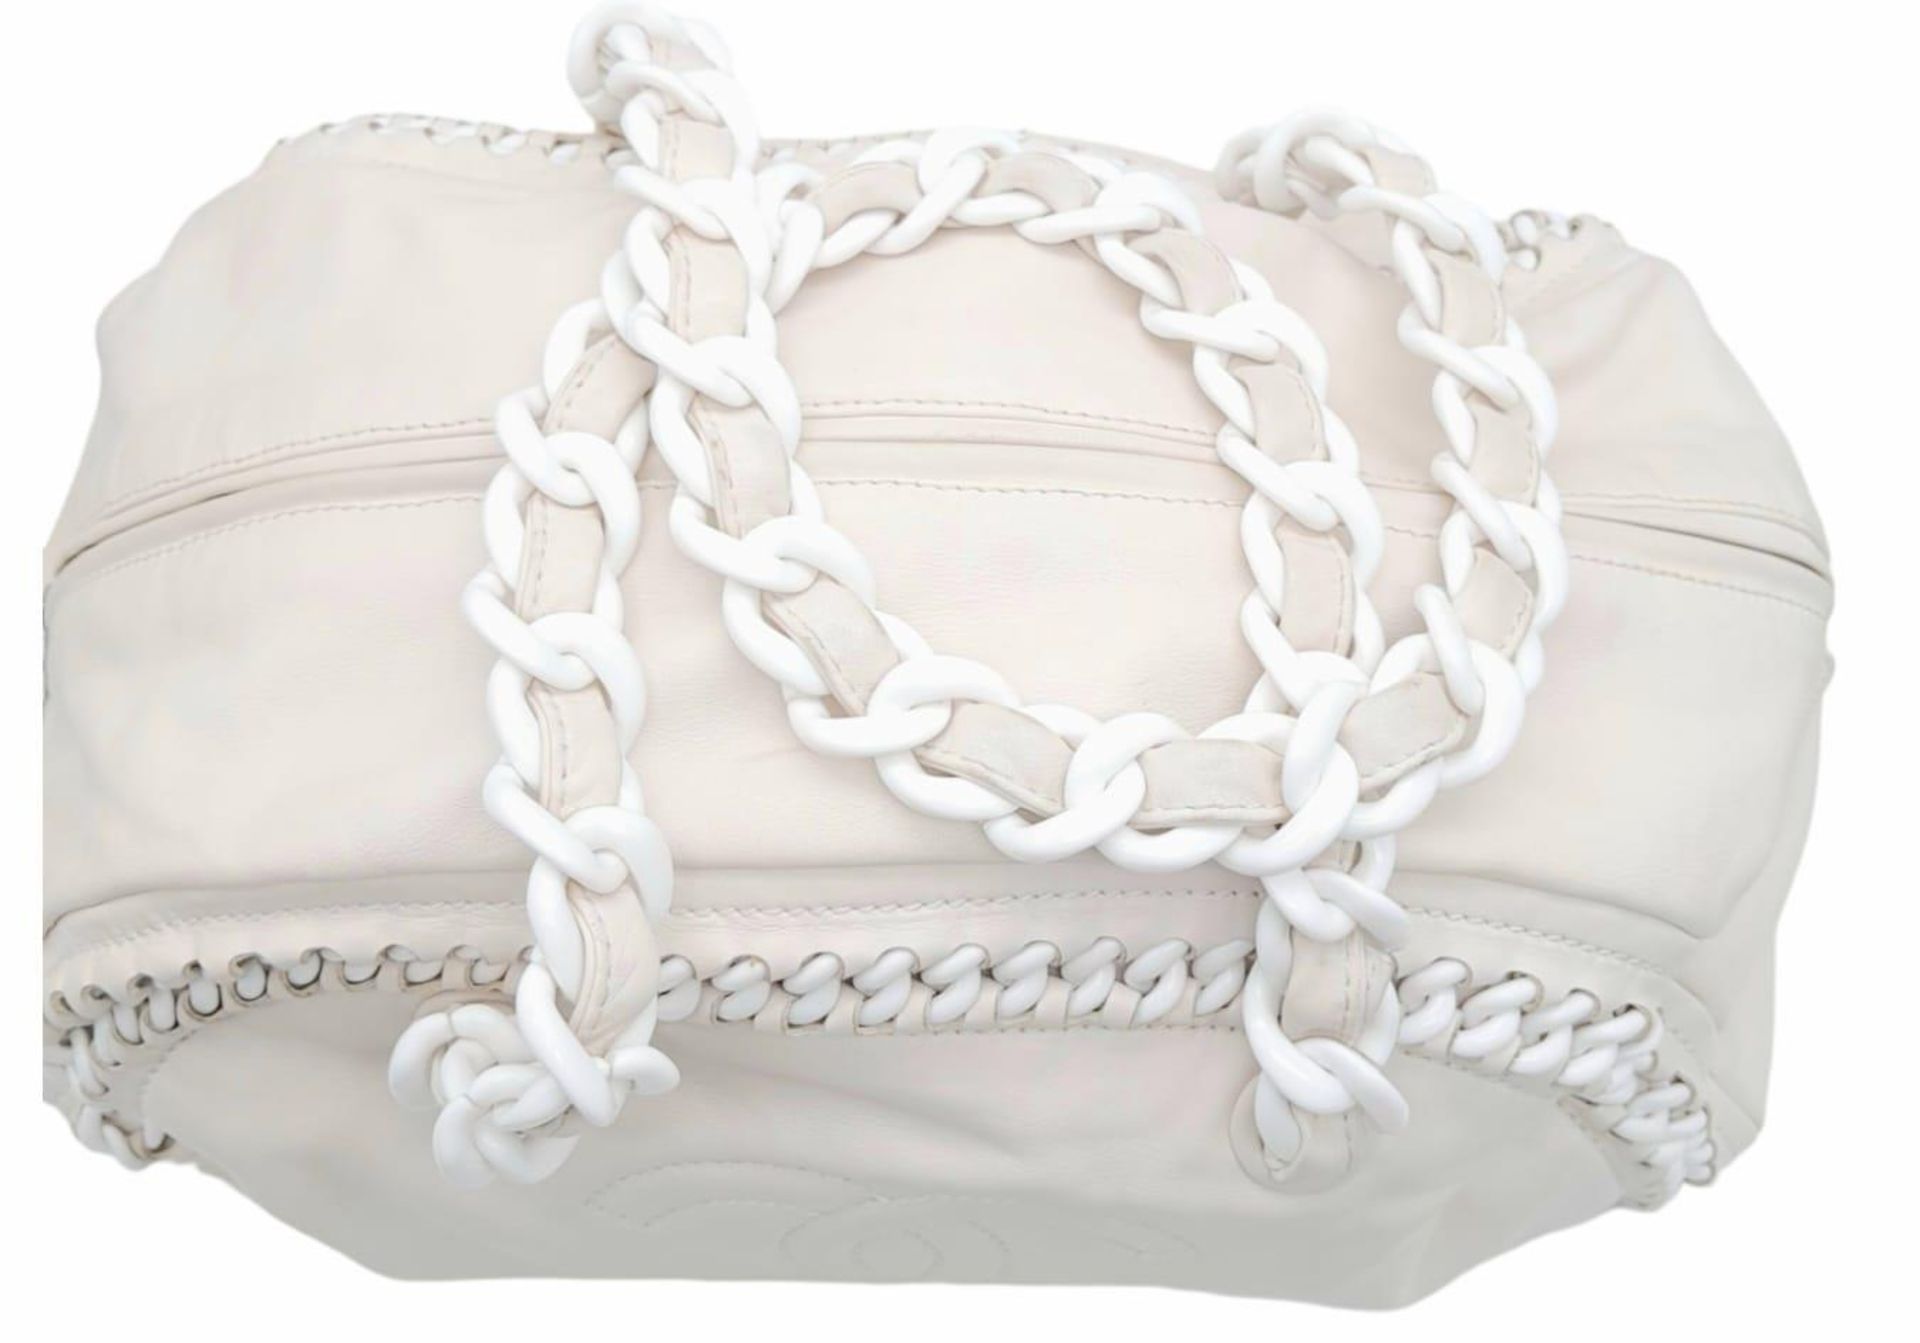 A Chanel Cream Crinkled Leather Chain Bag. Interwoven chain and leather top handles. Zip closure - Image 4 of 10